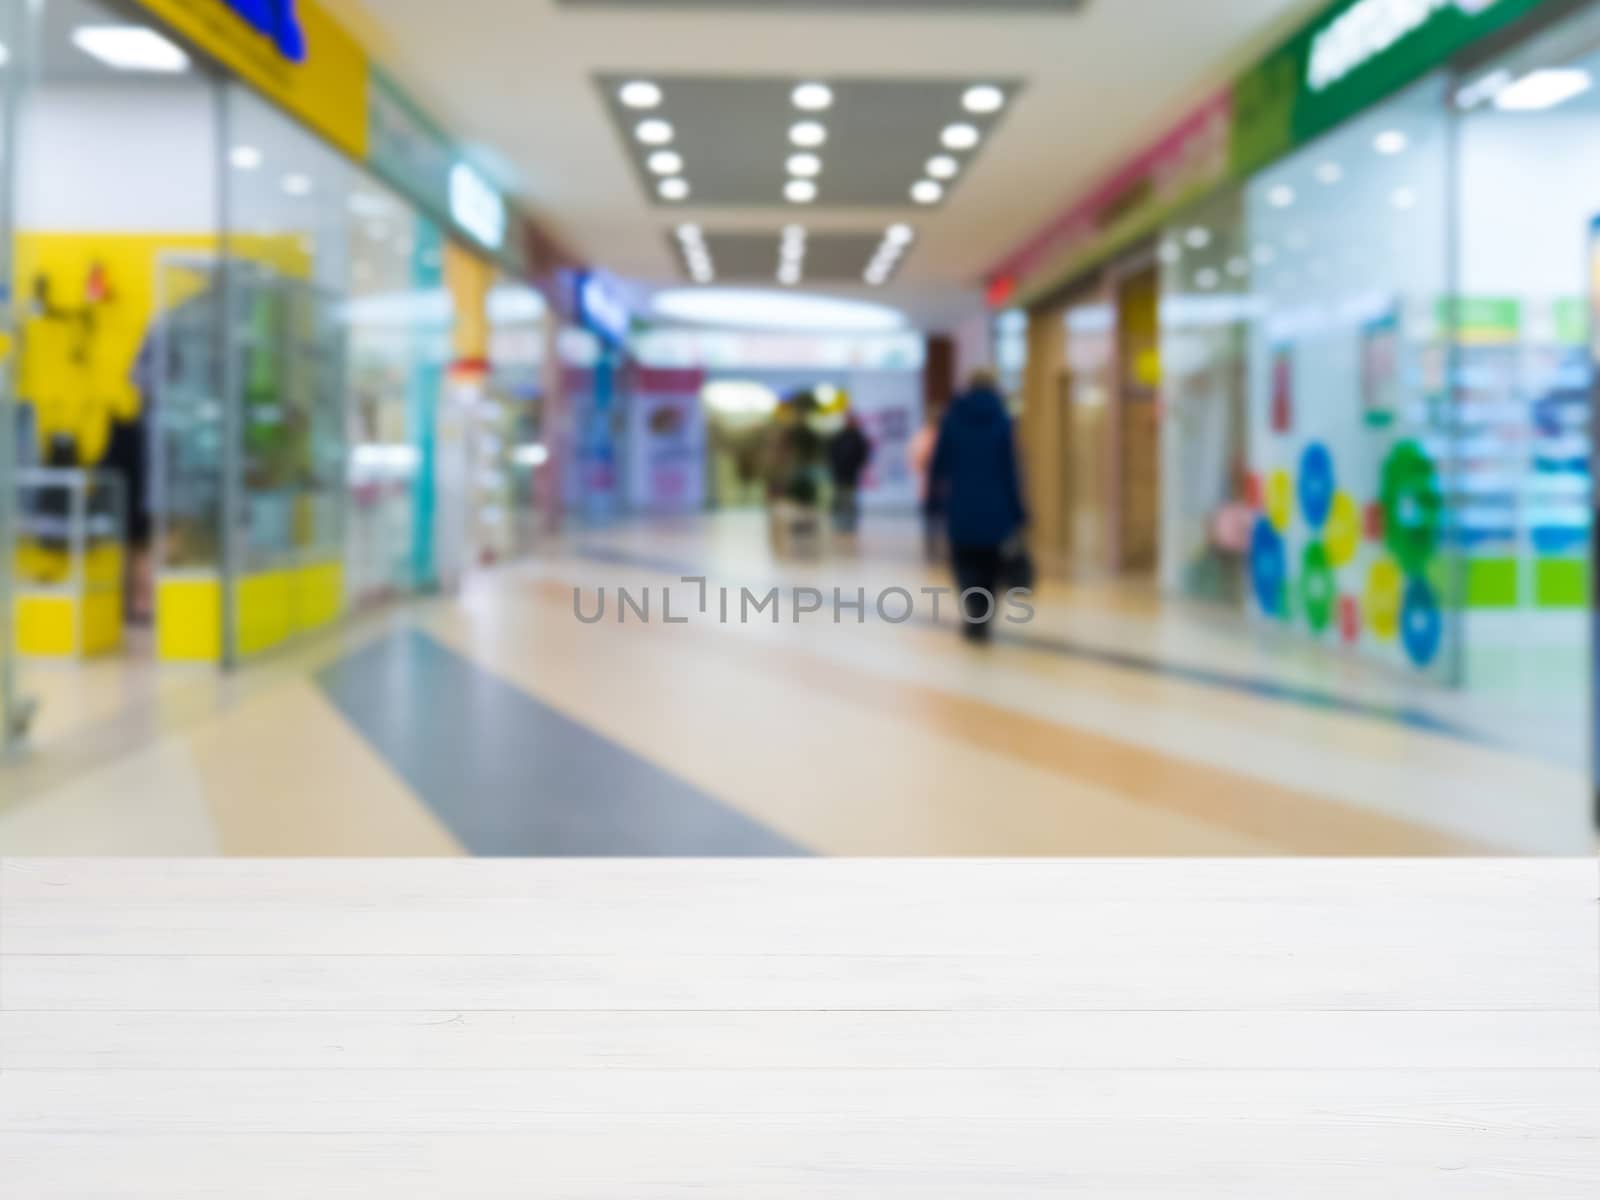 White wooden board empty table in front of blurred shopping mall - can be used for display or montage your products. Mockup for display of product.